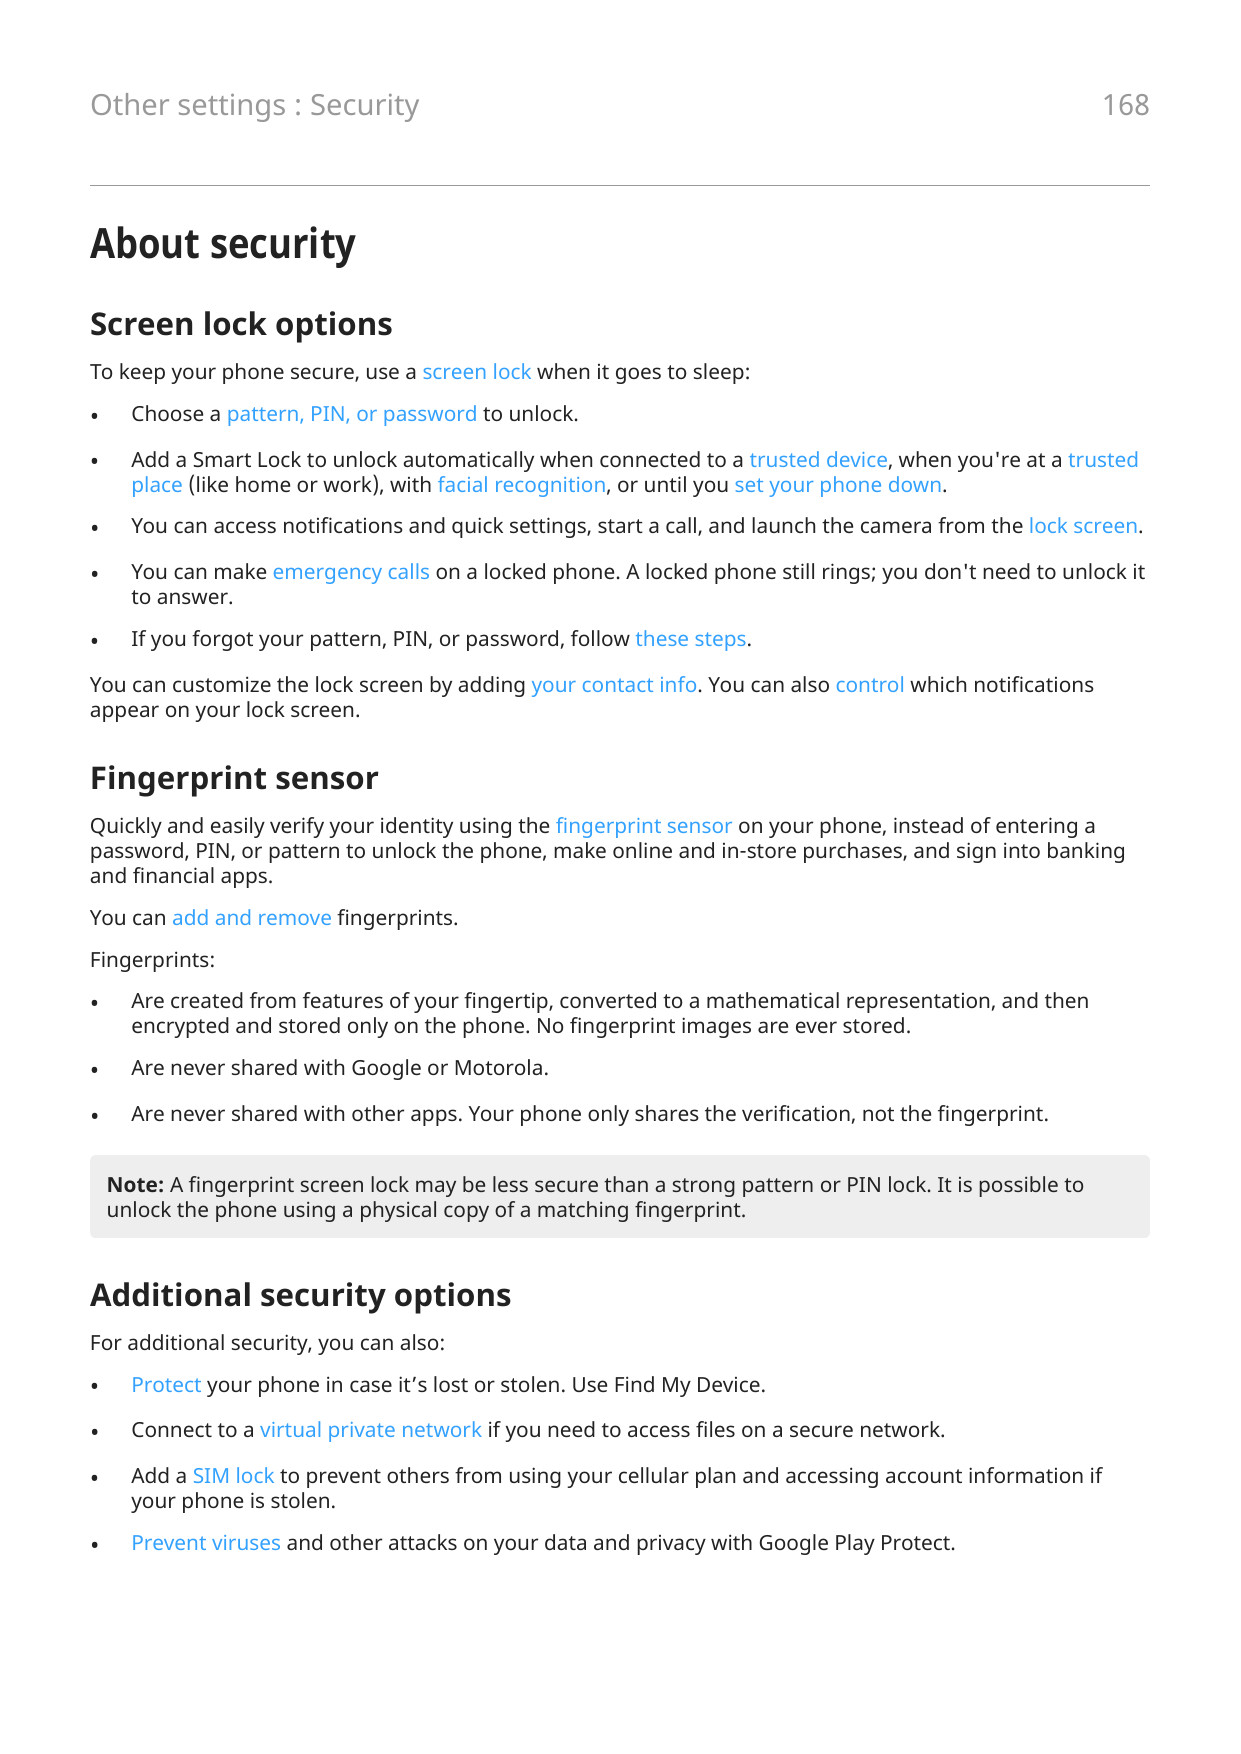 Other settings : Security168About securityScreen lock optionsTo keep your phone secure, use a screen lock when it goes to sleep: